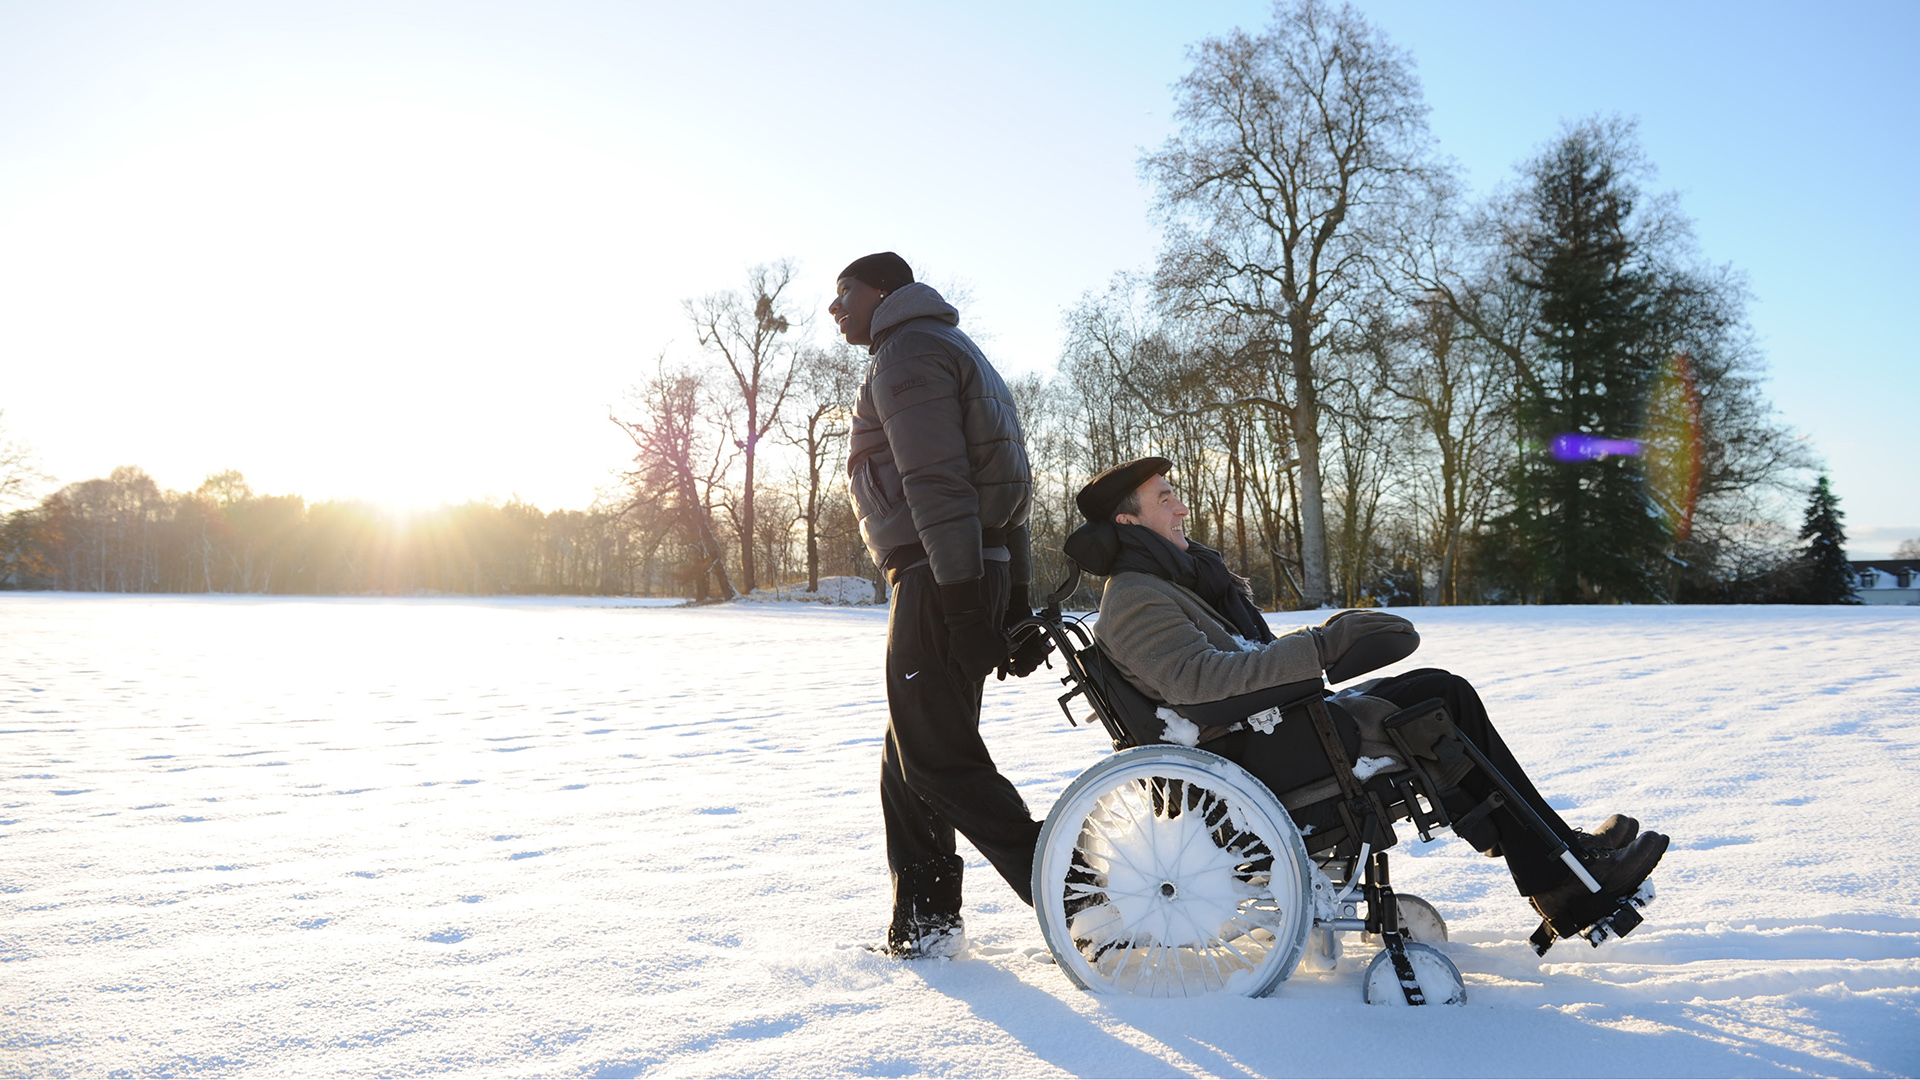 Omar Sy Driss The Intouchables Francois Cluzet Philippe The Intouchables Wheelchair Smile Snow Sunri 1920x1080